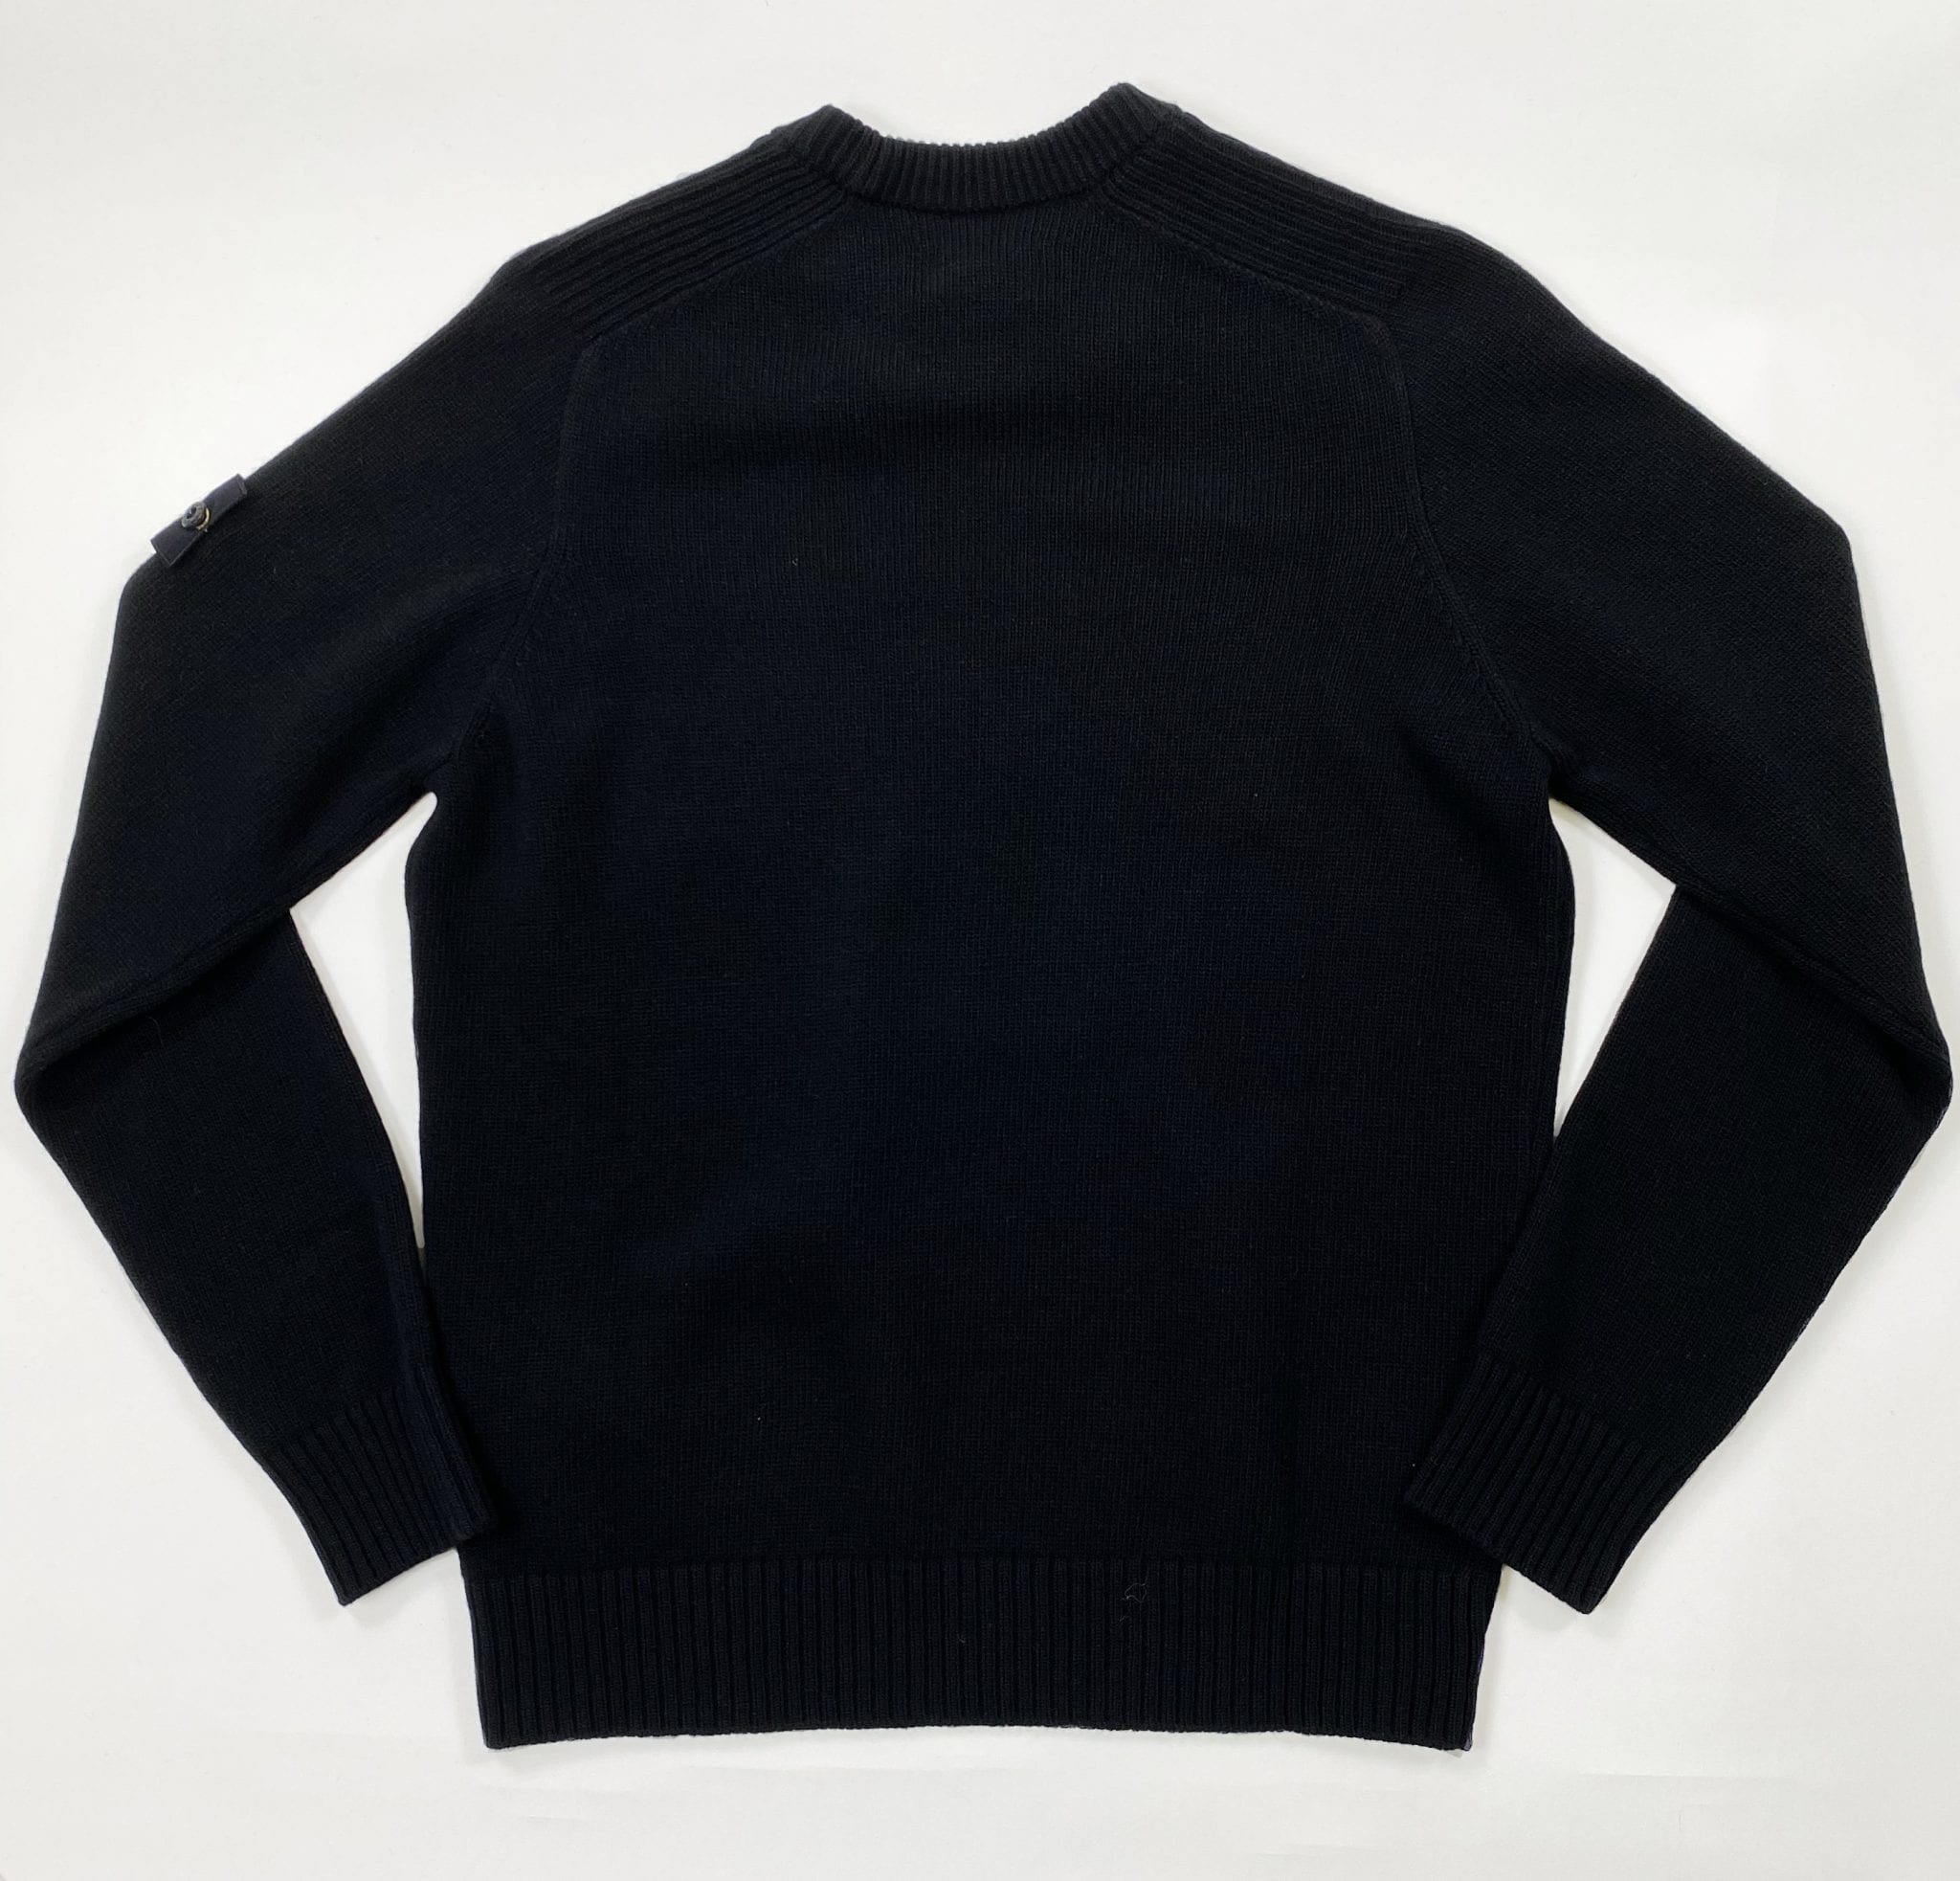 Stone Island Lambswool Jumper - Esquire Clothing